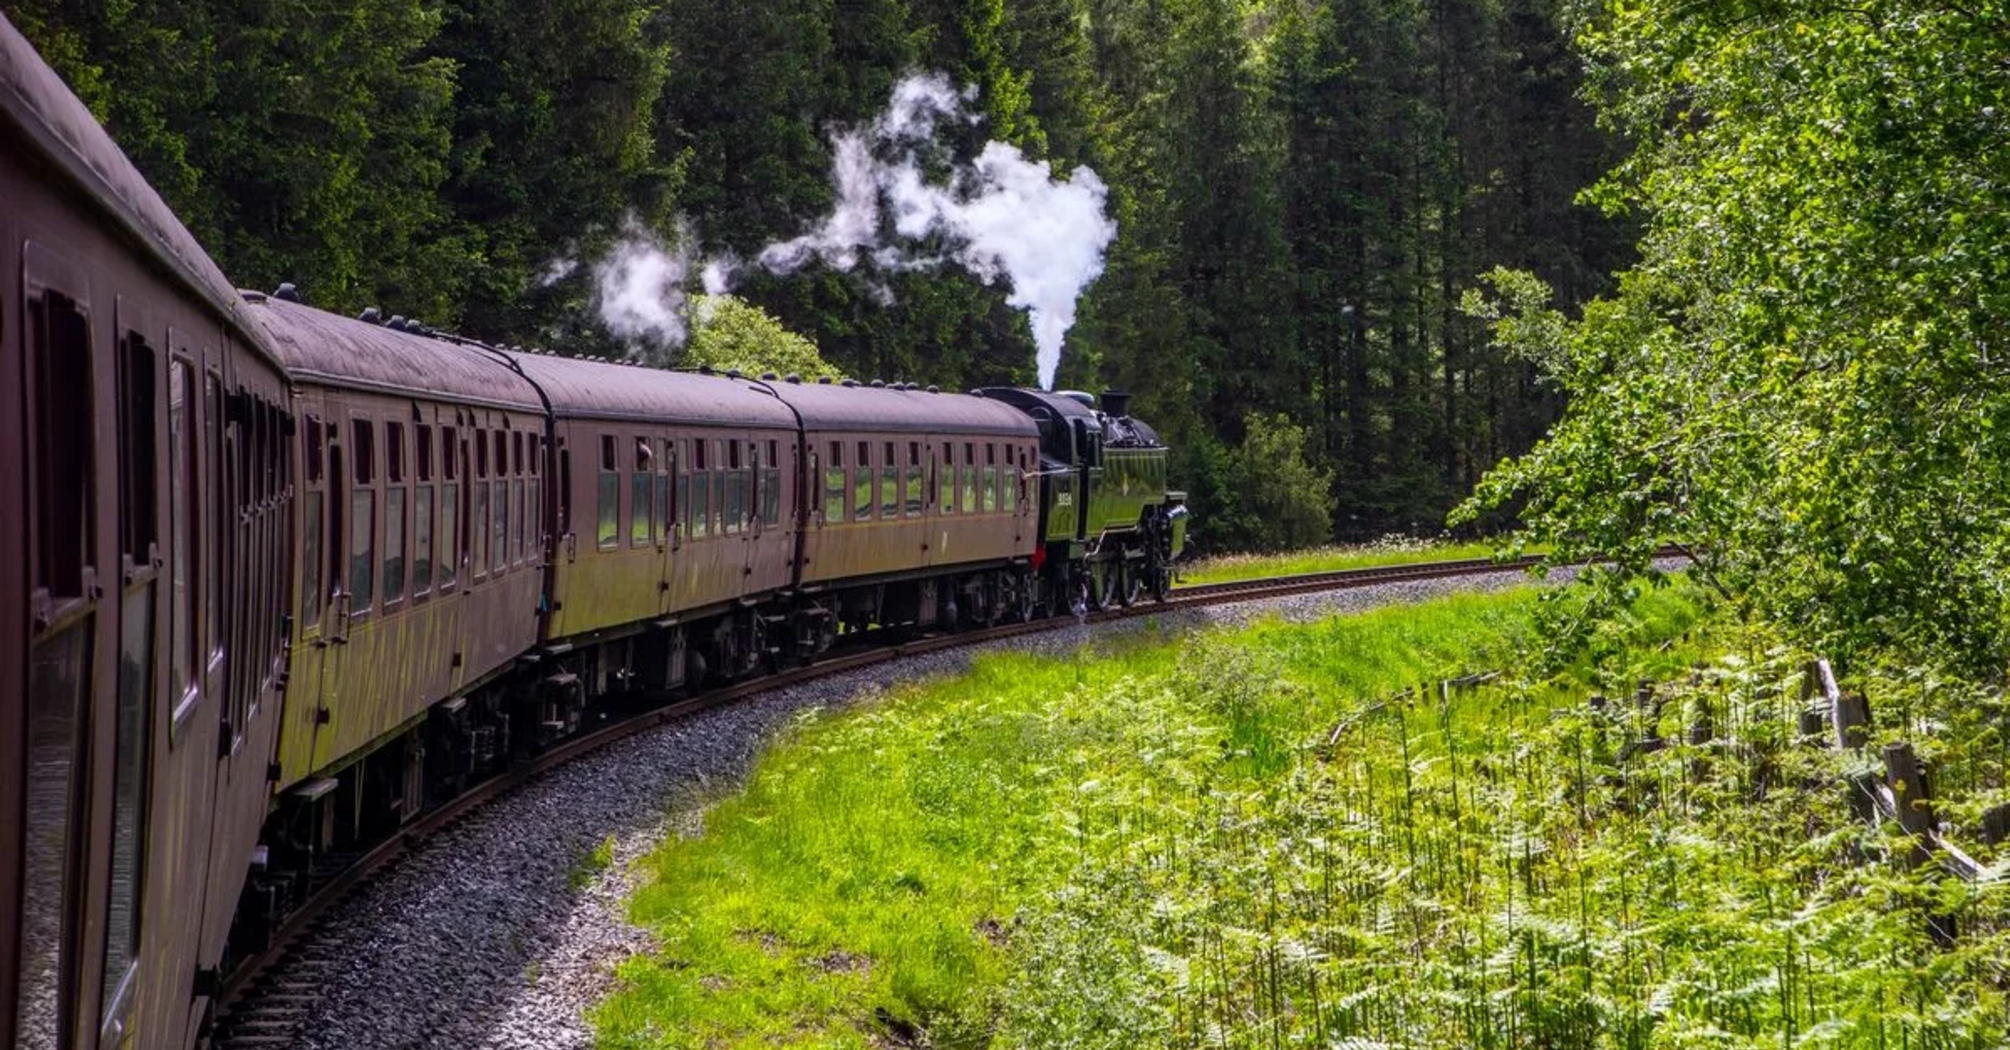 A fairytale journey on British railways: what is known about Steam Dreams